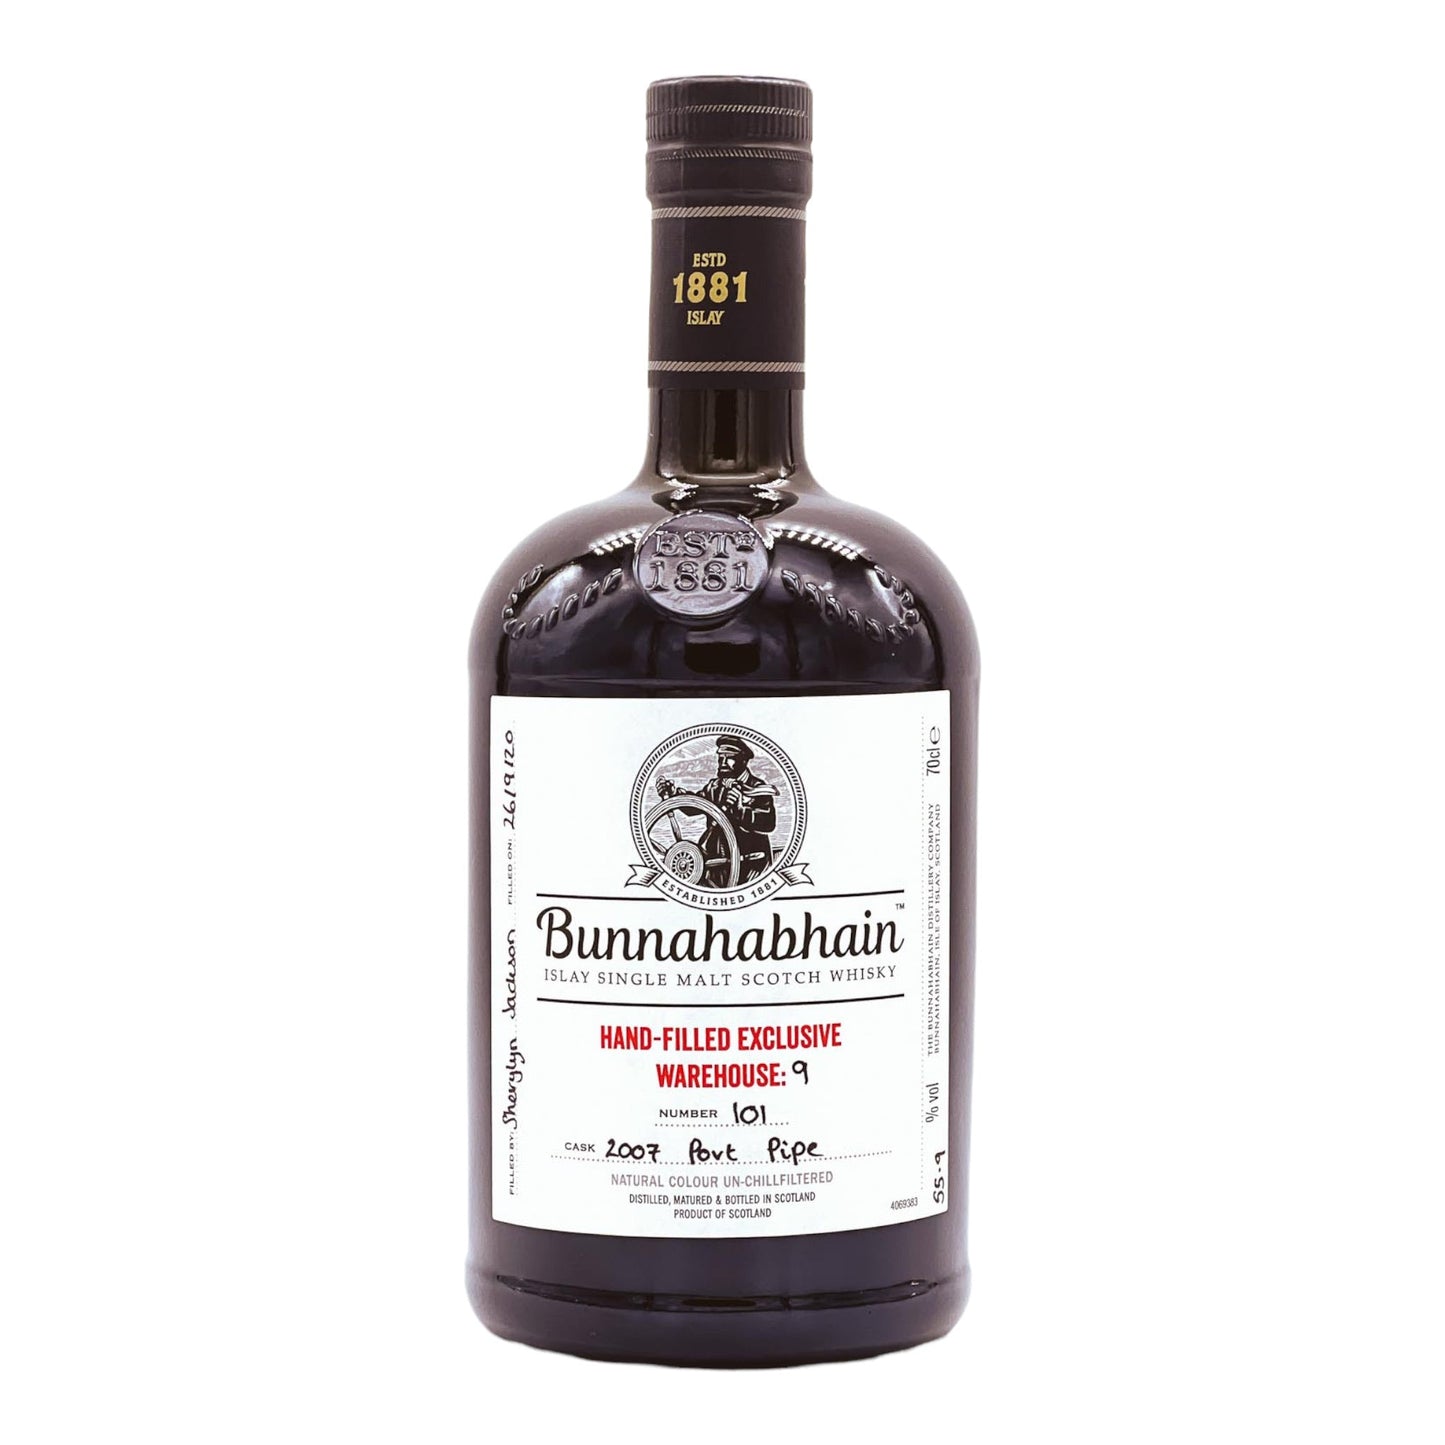 Bunnahabhain | Hand-Filled Exclusive Warehouse #9 Cask 101 | 2007 Port Pipe | 0,7l | 55,9%GET A BOTTLE